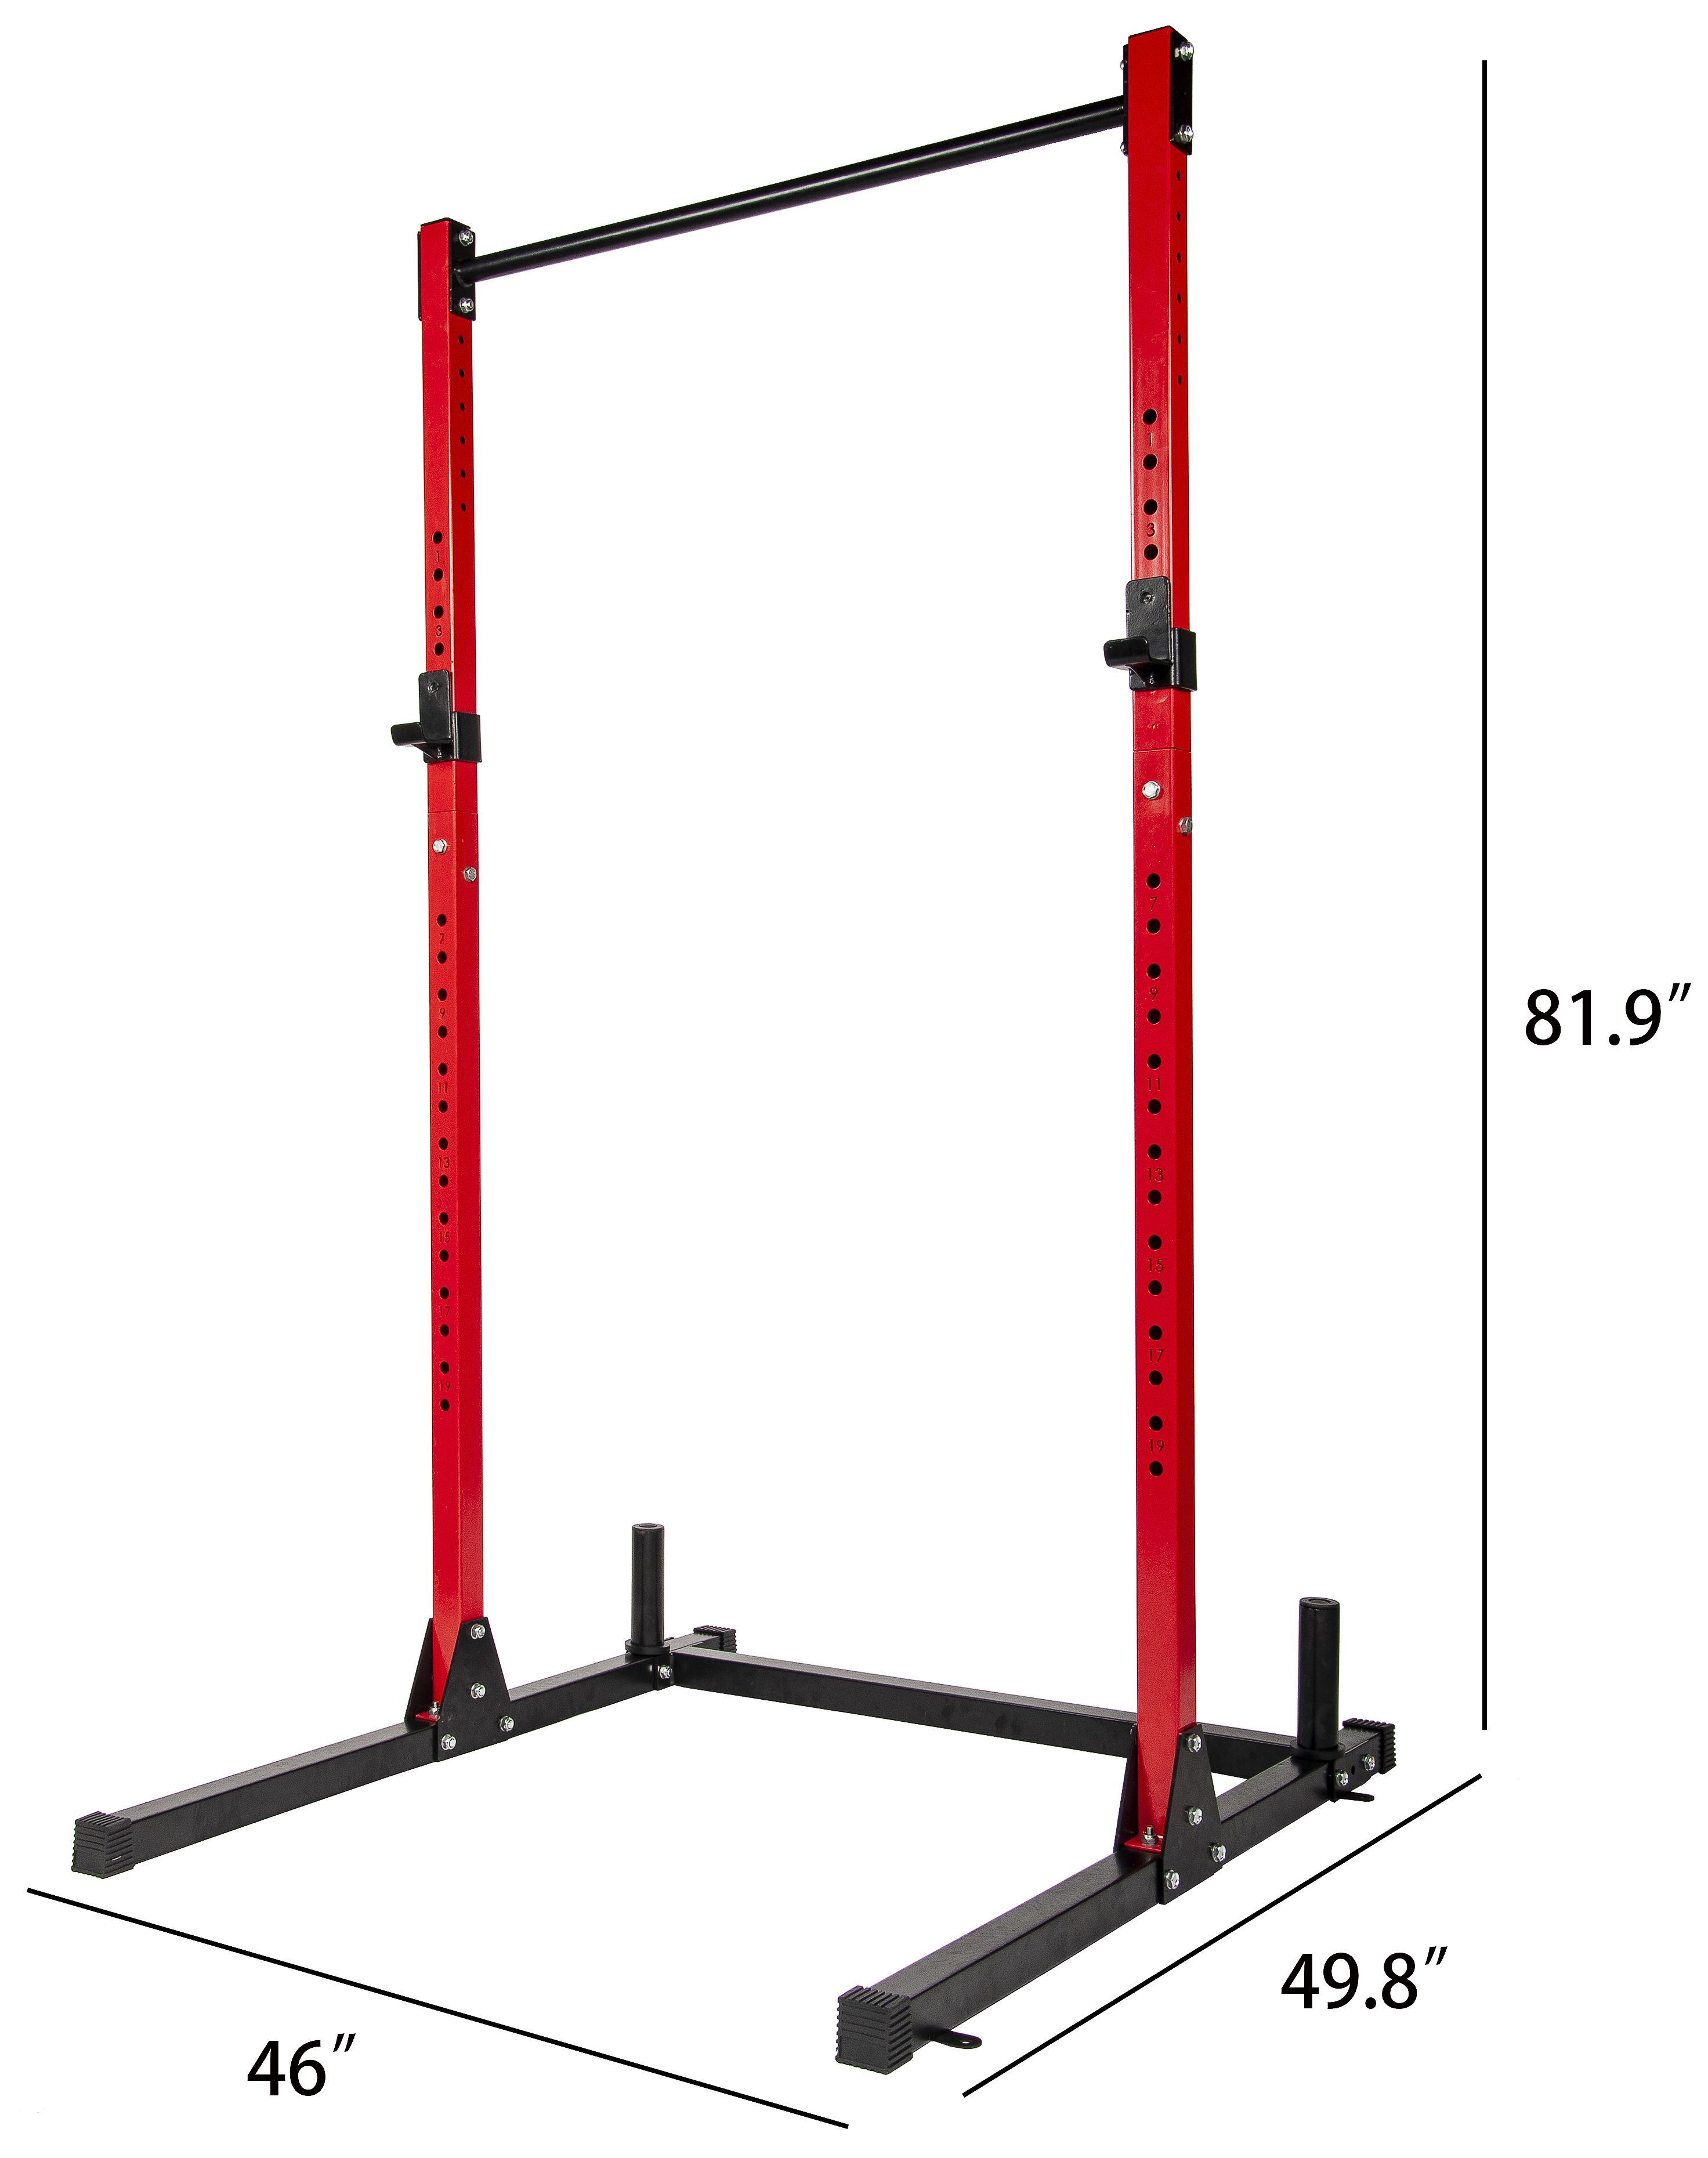 BalanceFrom Multi-Function Adjustable Power Rack Exercise Squat Stand with J-Hooks and Other Accessories, 500lb Capacity - image 2 of 7